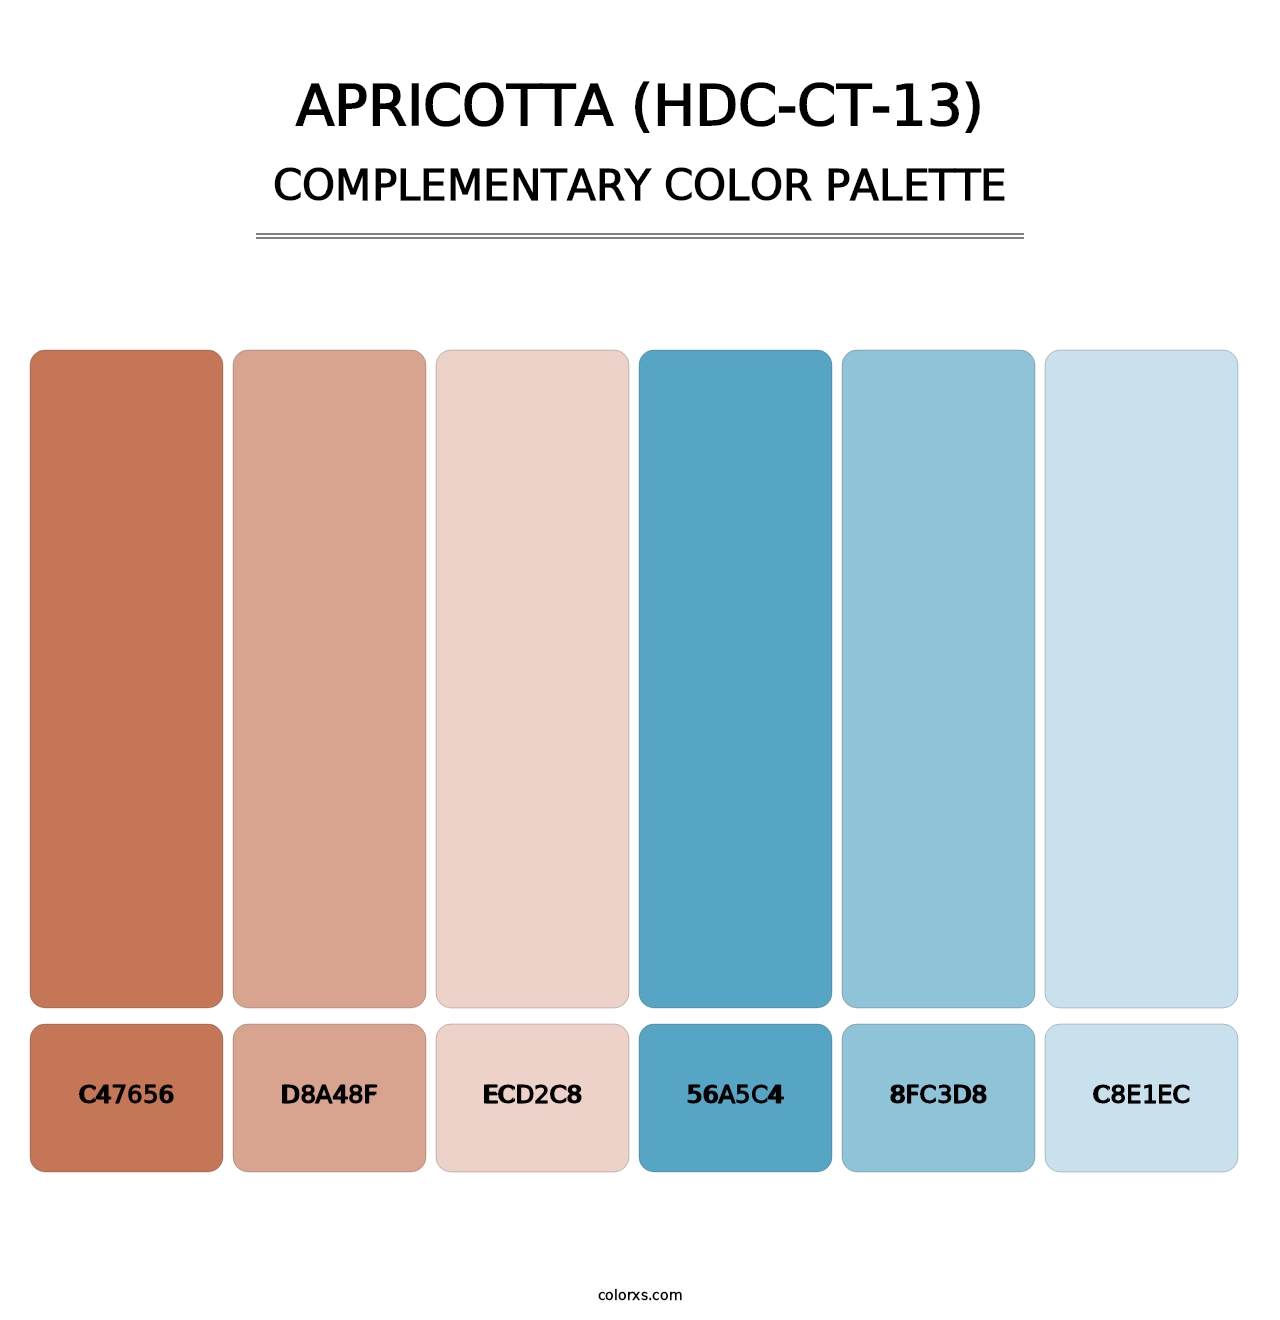 Apricotta (HDC-CT-13) - Complementary Color Palette